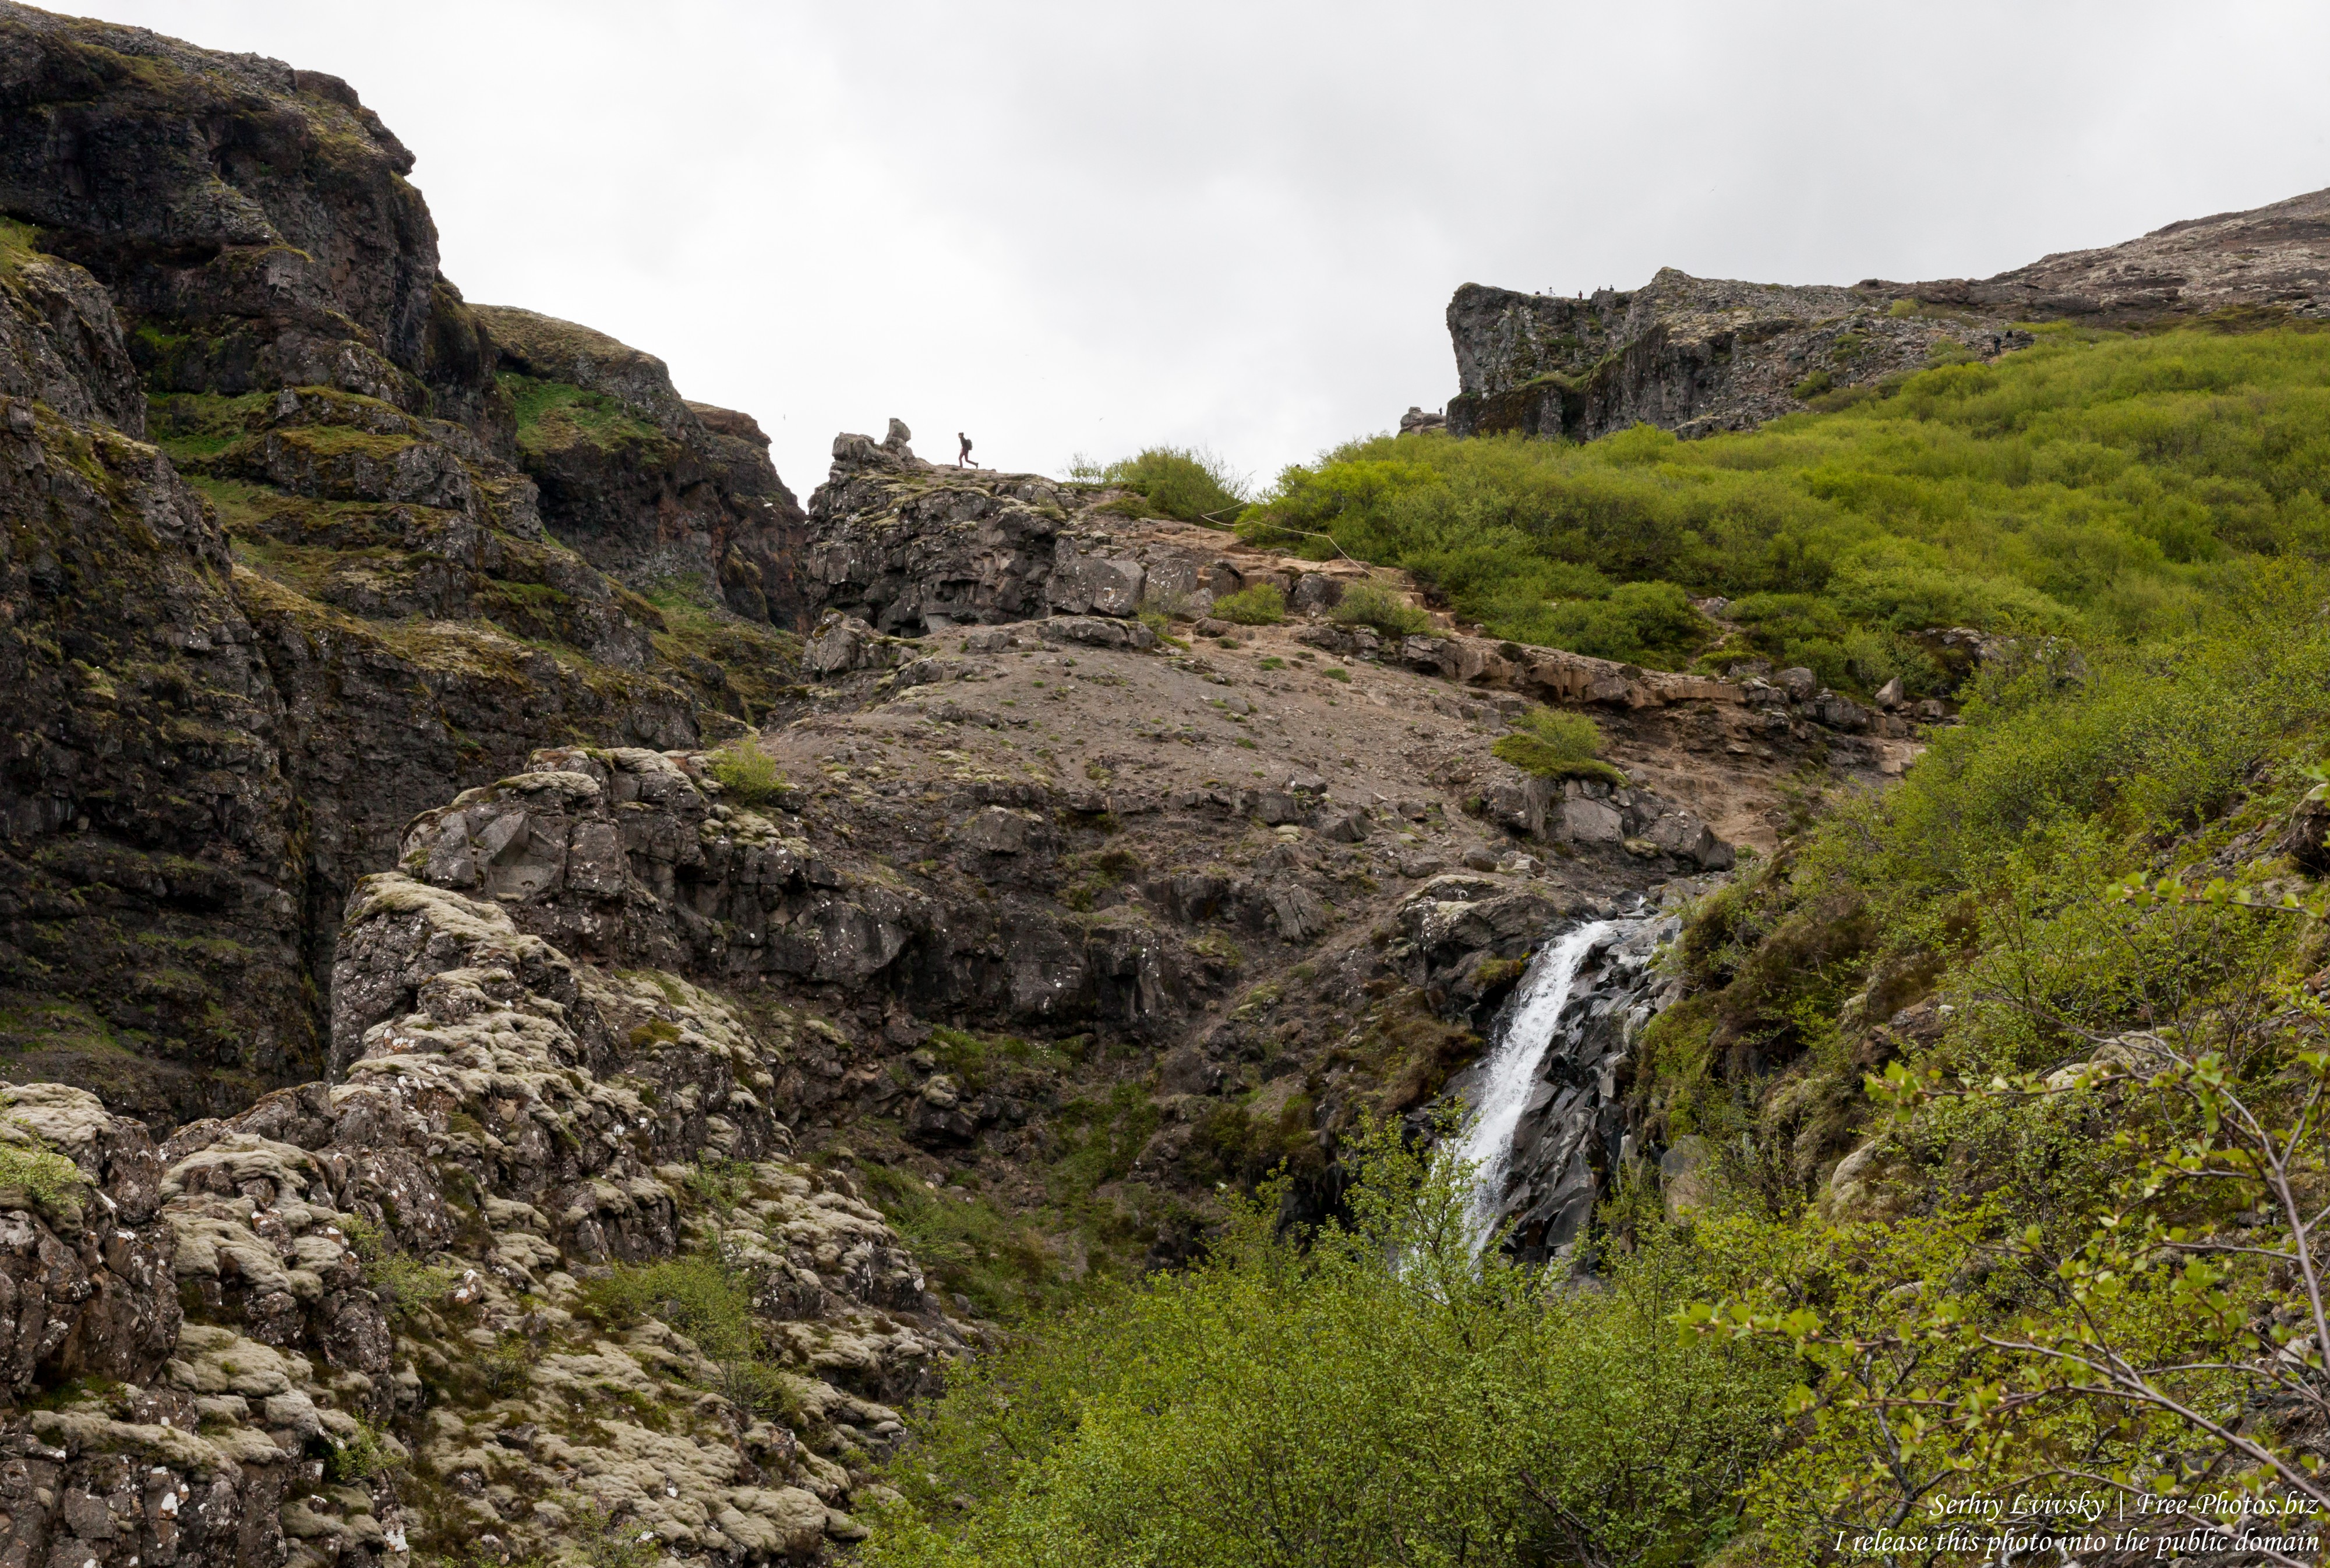 Glymur, Iceland, photographed in May 2019 by Serhiy Lvivsky, picture 3